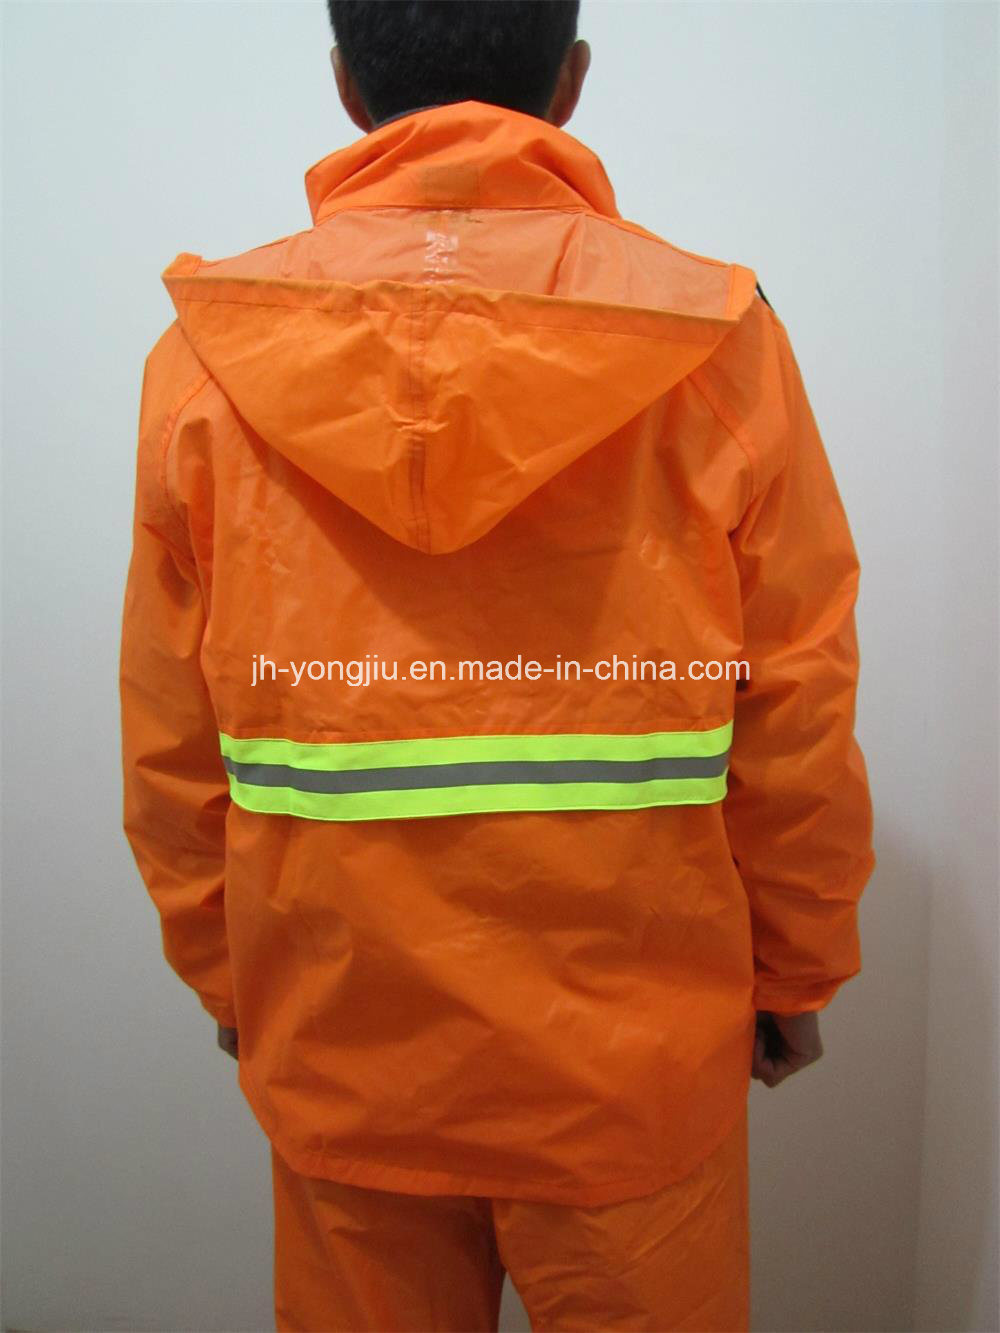 Working Garment Clothes (yj-112509)